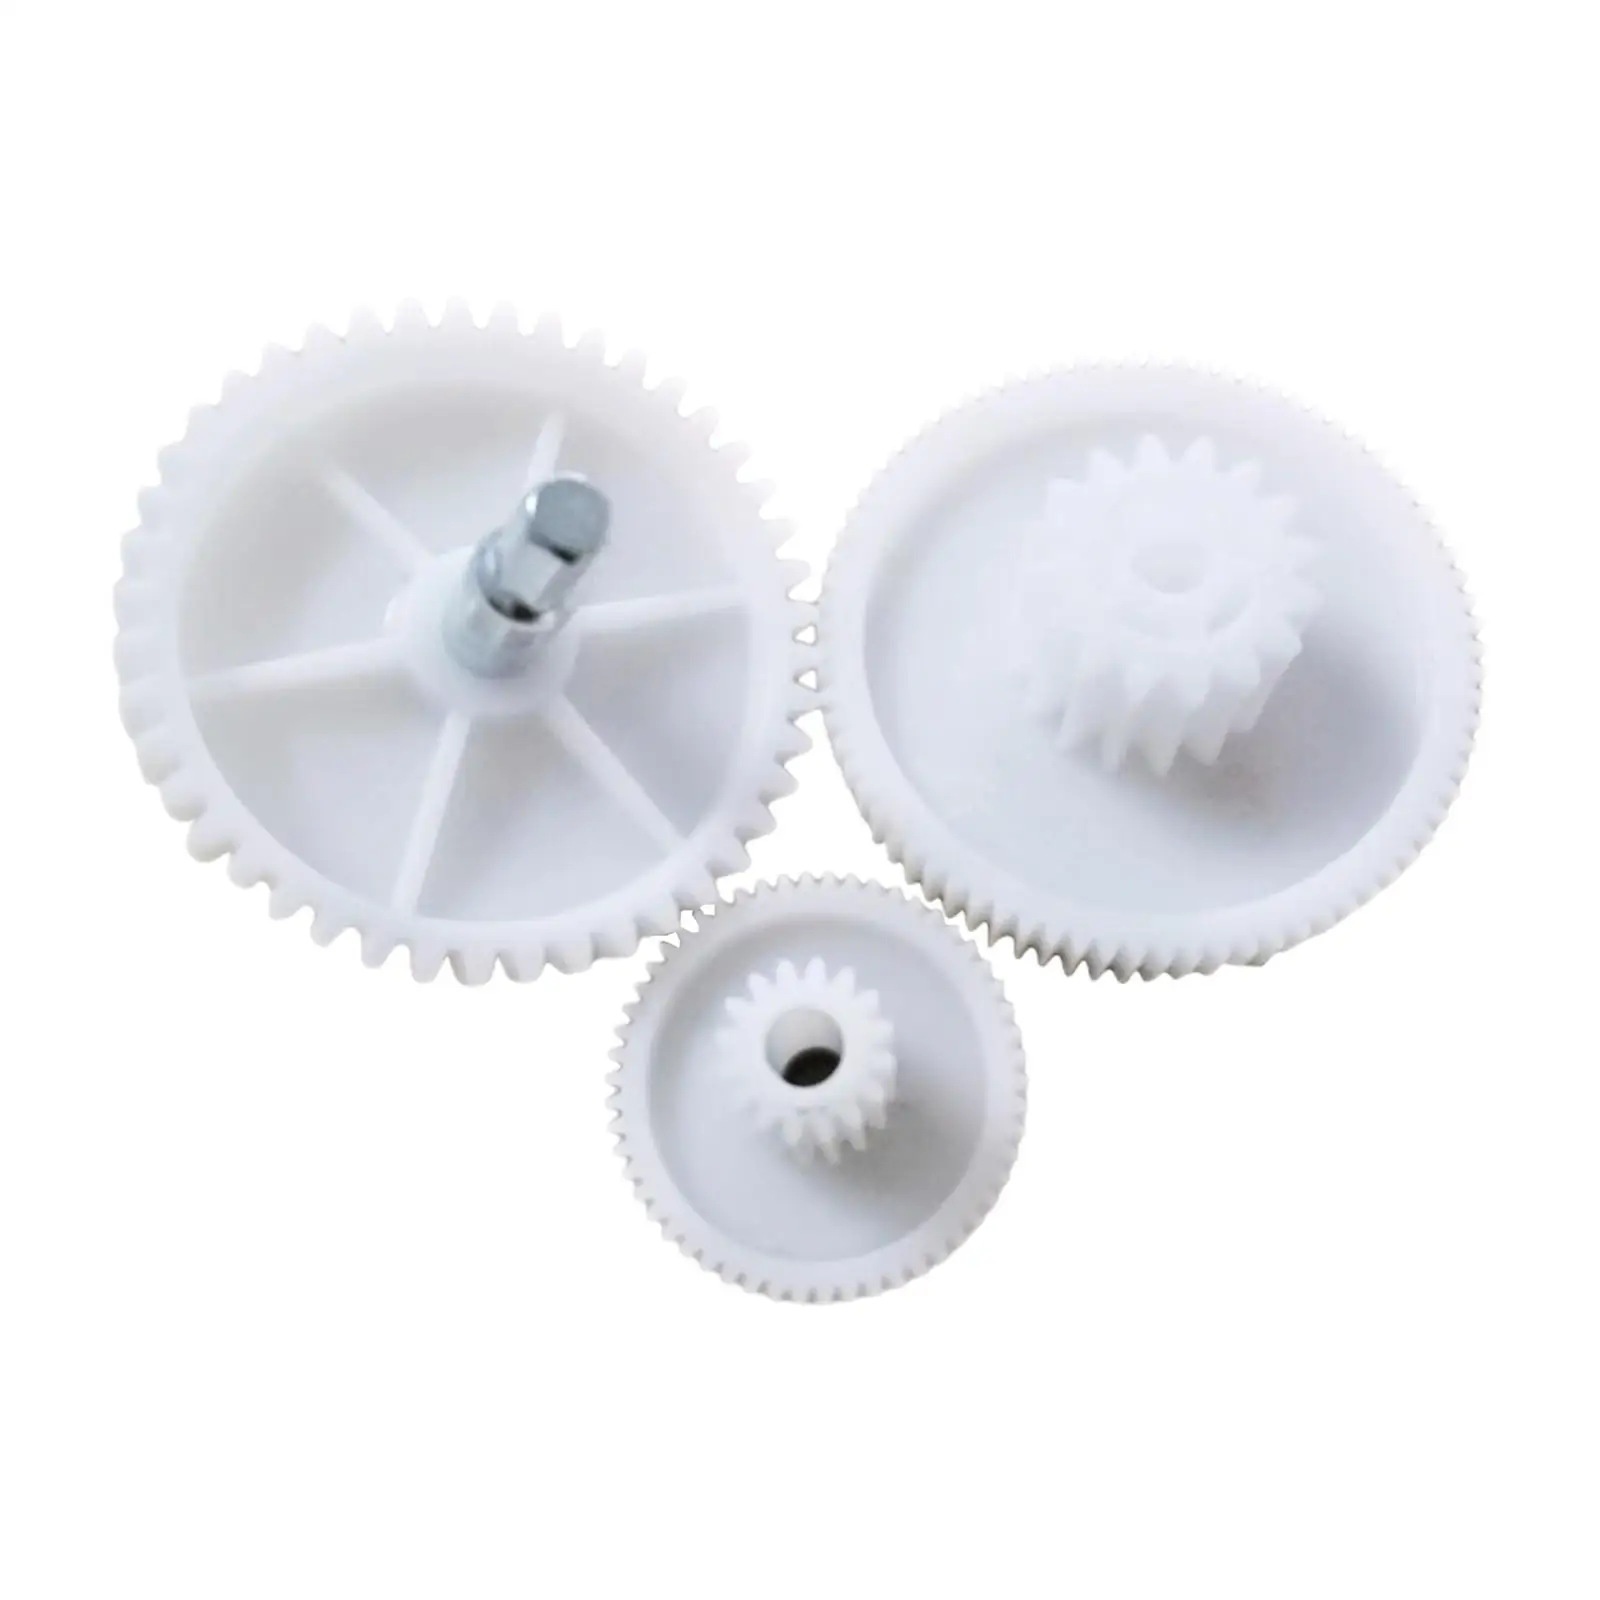 3Pcs Household Meat Mincer Gear Replacement Washable for Cooking BBQ